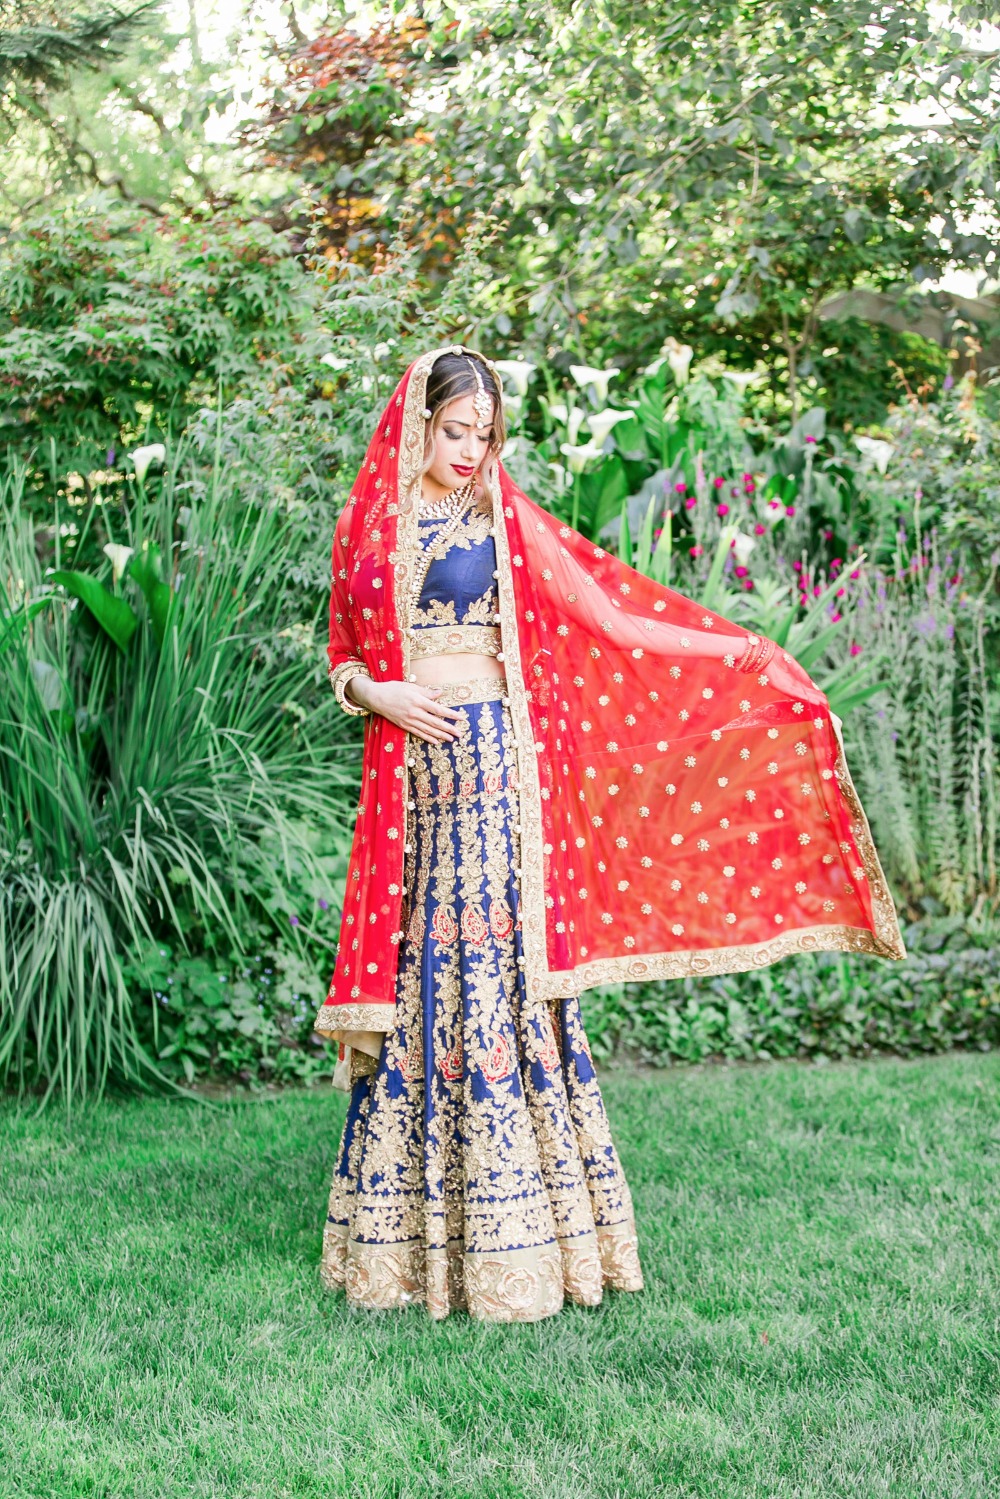 Tradition Indian dress